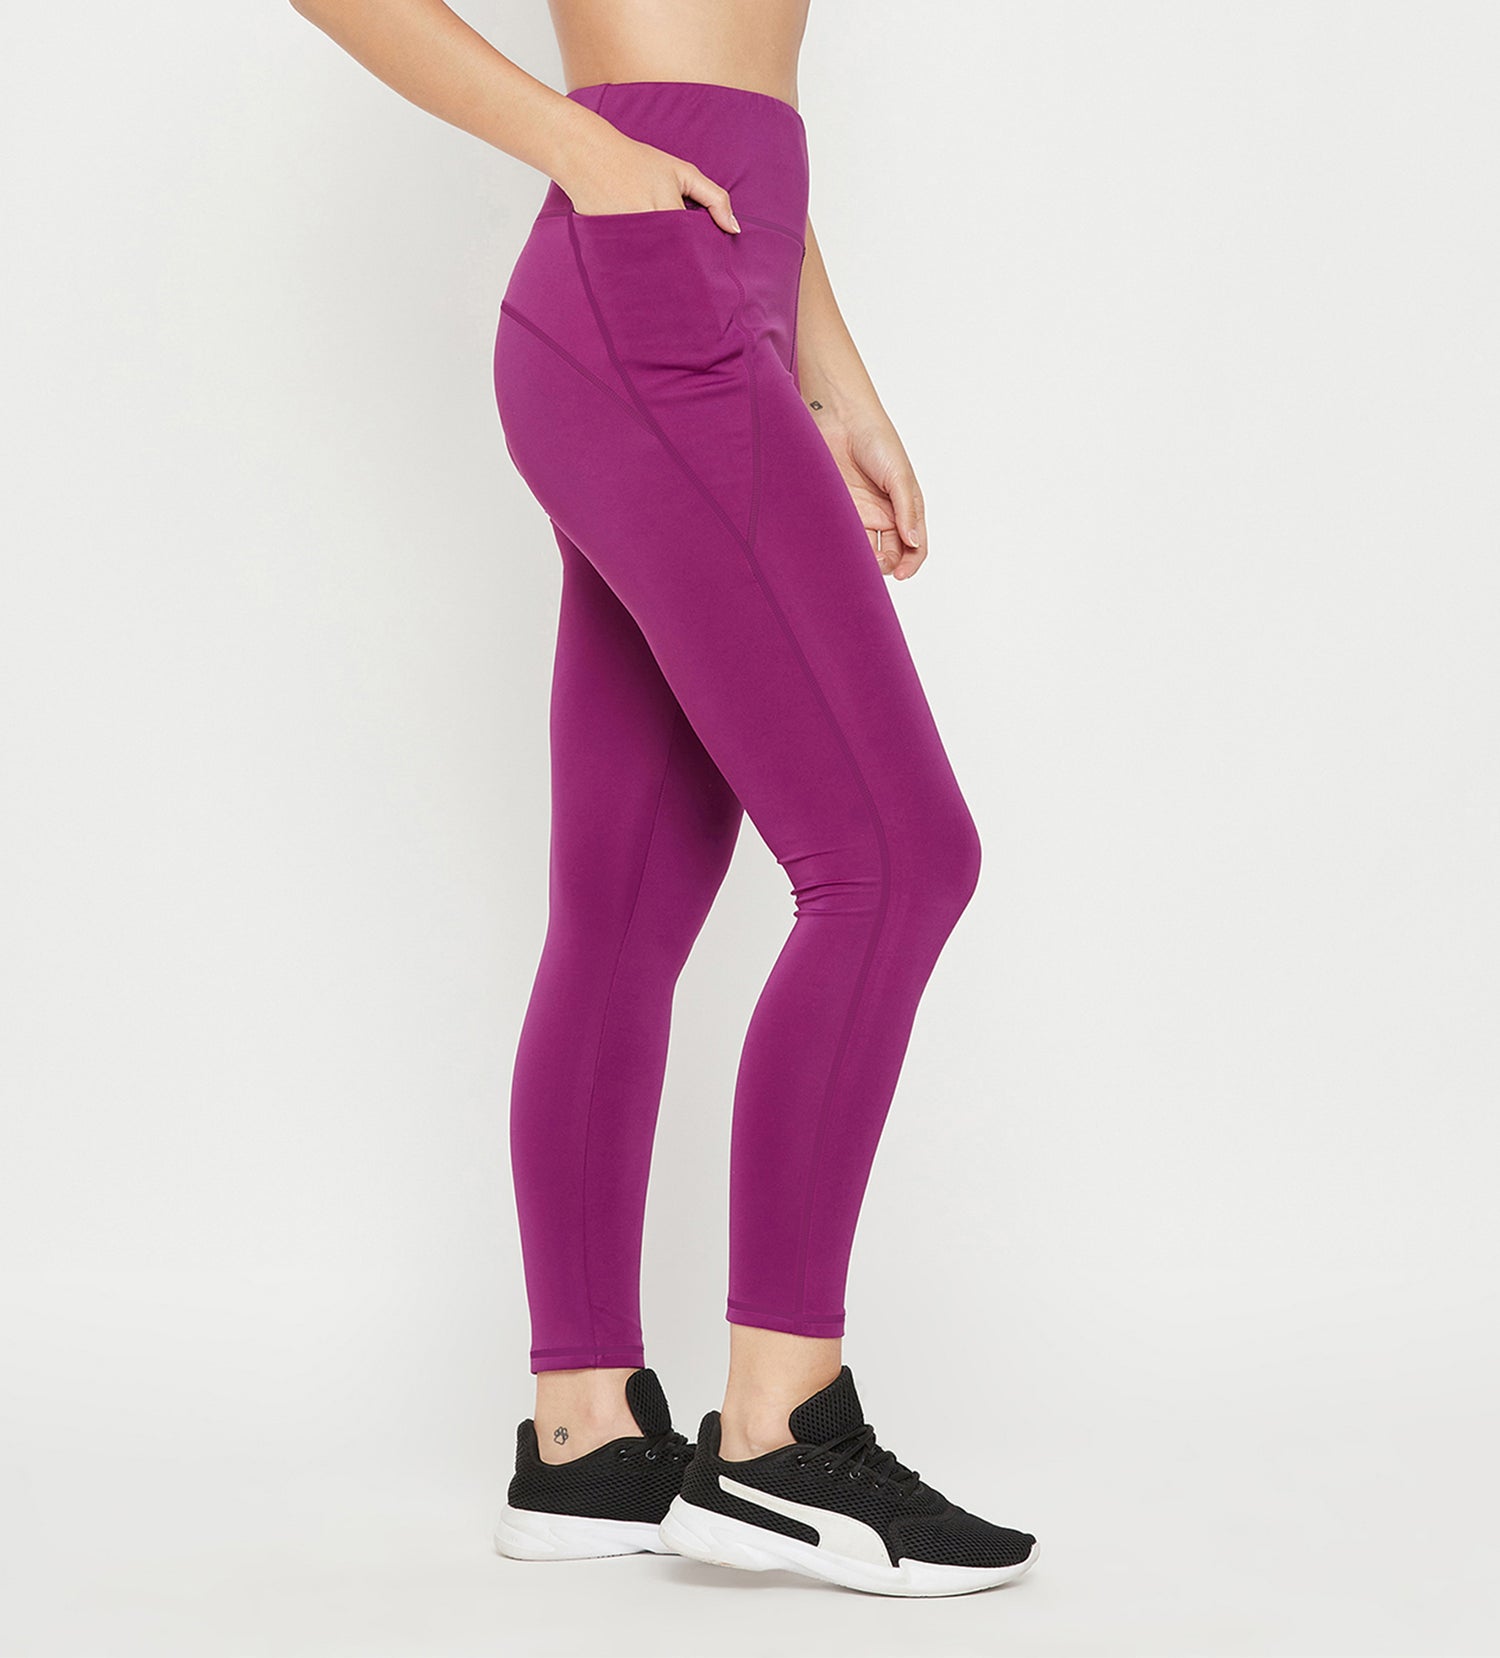 High Waist Full Length Tights With Contrast Pipen Along With Side Pockets